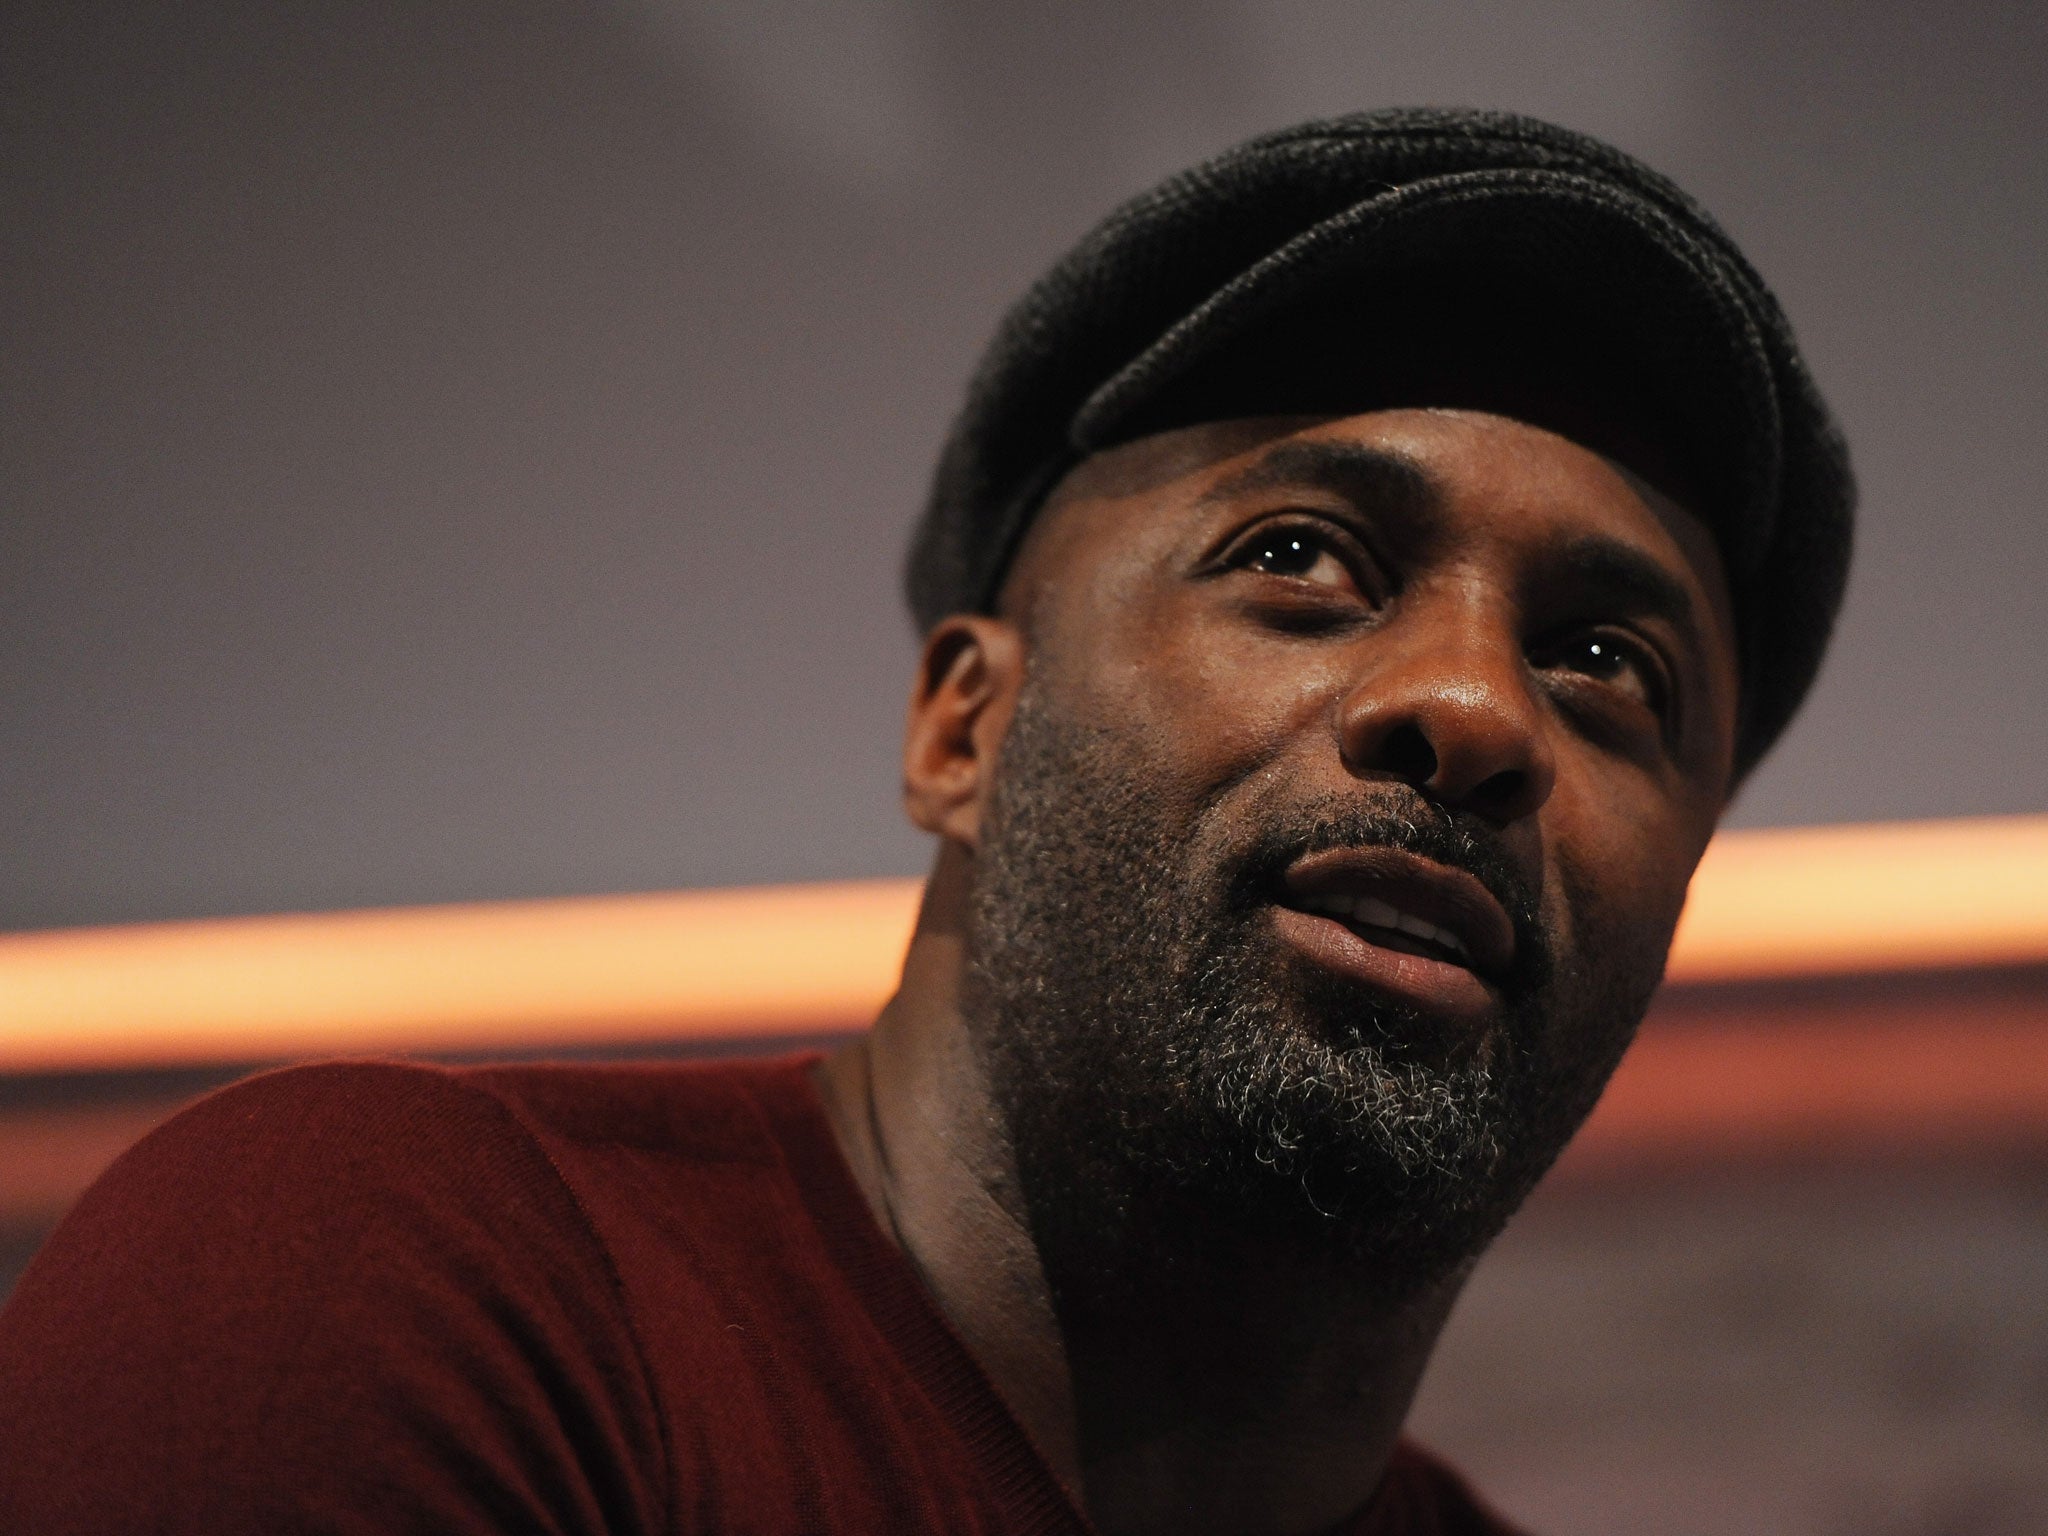 Idris Elba, who starred in The Wire, will work with the parent of the Superdry brand to produce a premium clothing line